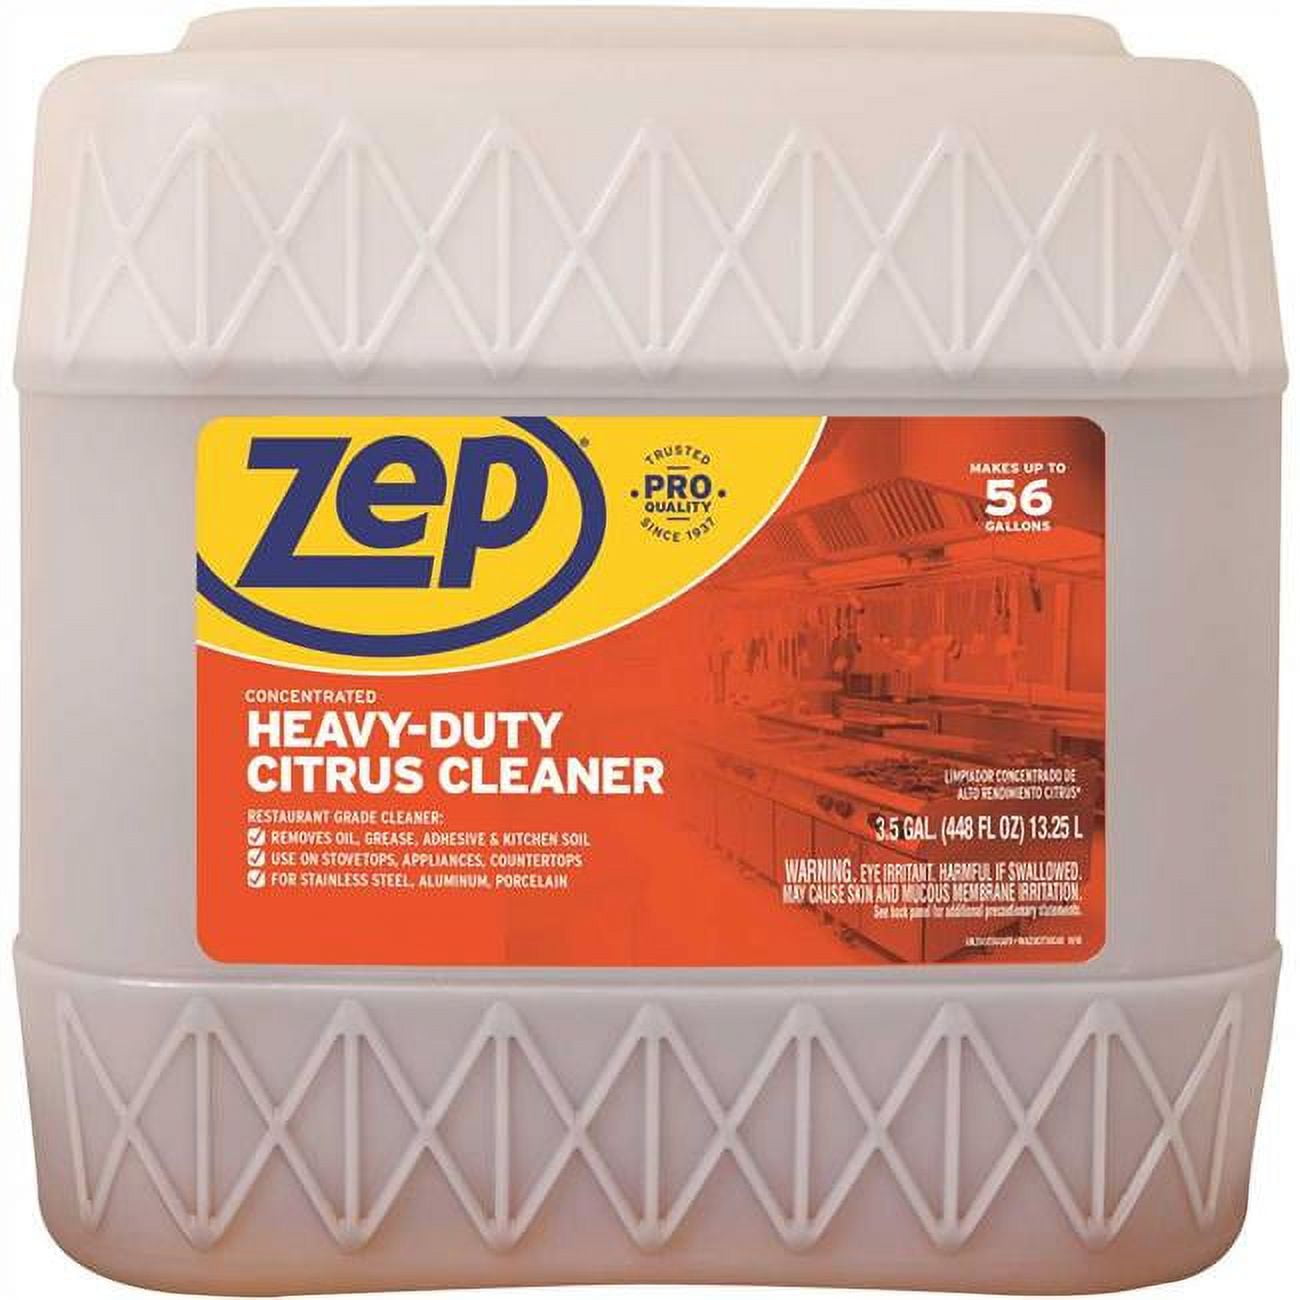 Zep Heavy-duty 12-Pack 19-oz Foam Oven Cleaner in the Oven